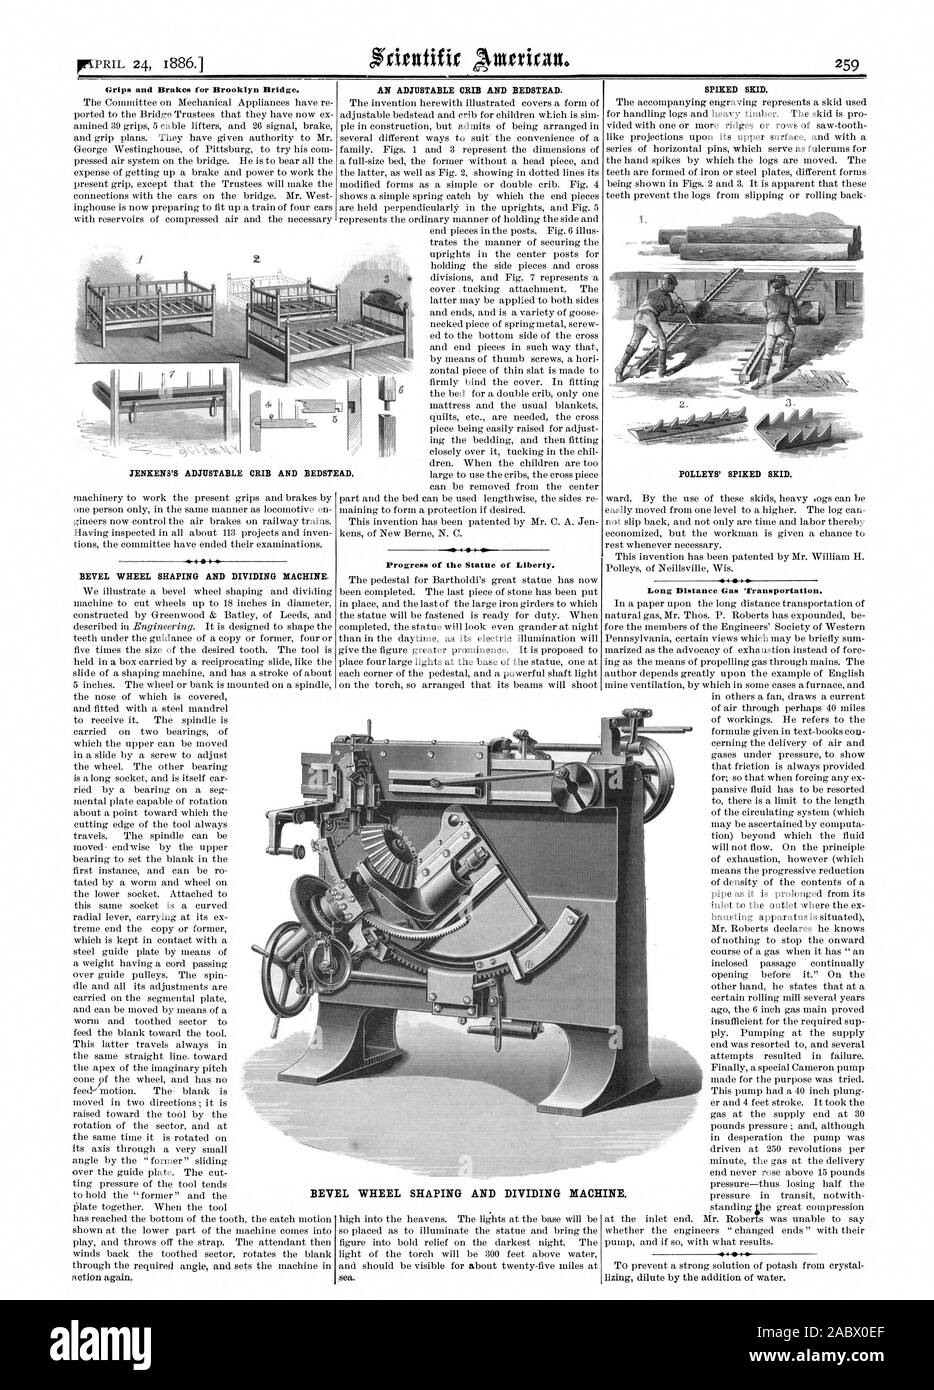 Grips and Brakes for Brooklyn Bridge. BEVEL WHEEL SHAPING AND DIVIDING MACHINE. AN ADJUSTABLE CRIB AND BEDSTEAD. Progress of the Statue of Liberty. SPIKED SKID. POLLEYS' SPIKED SKID. Long Distance Gas Transportation. JENKENS'S ADJUSTABLE CRIB AND BEDSTEAD. BEVEL WHEEL SHAPING AND DIVIDING MACHINE., scientific american, 1886-04-24 Stock Photo